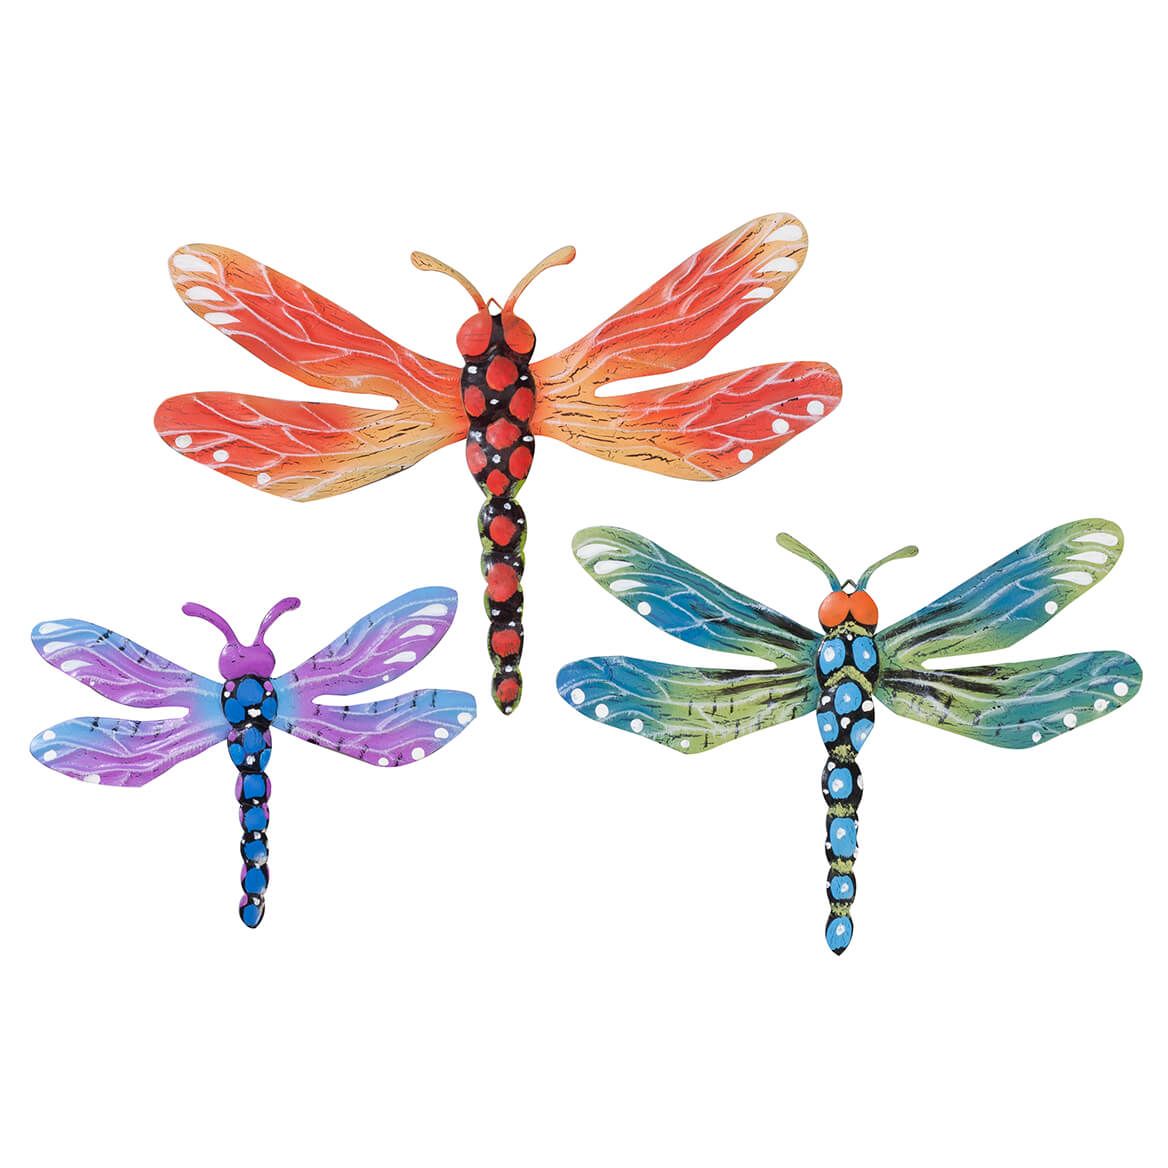 Metal Dragonfly Plaques, Set of 3 by Fox River™ Creations + '-' + 365866